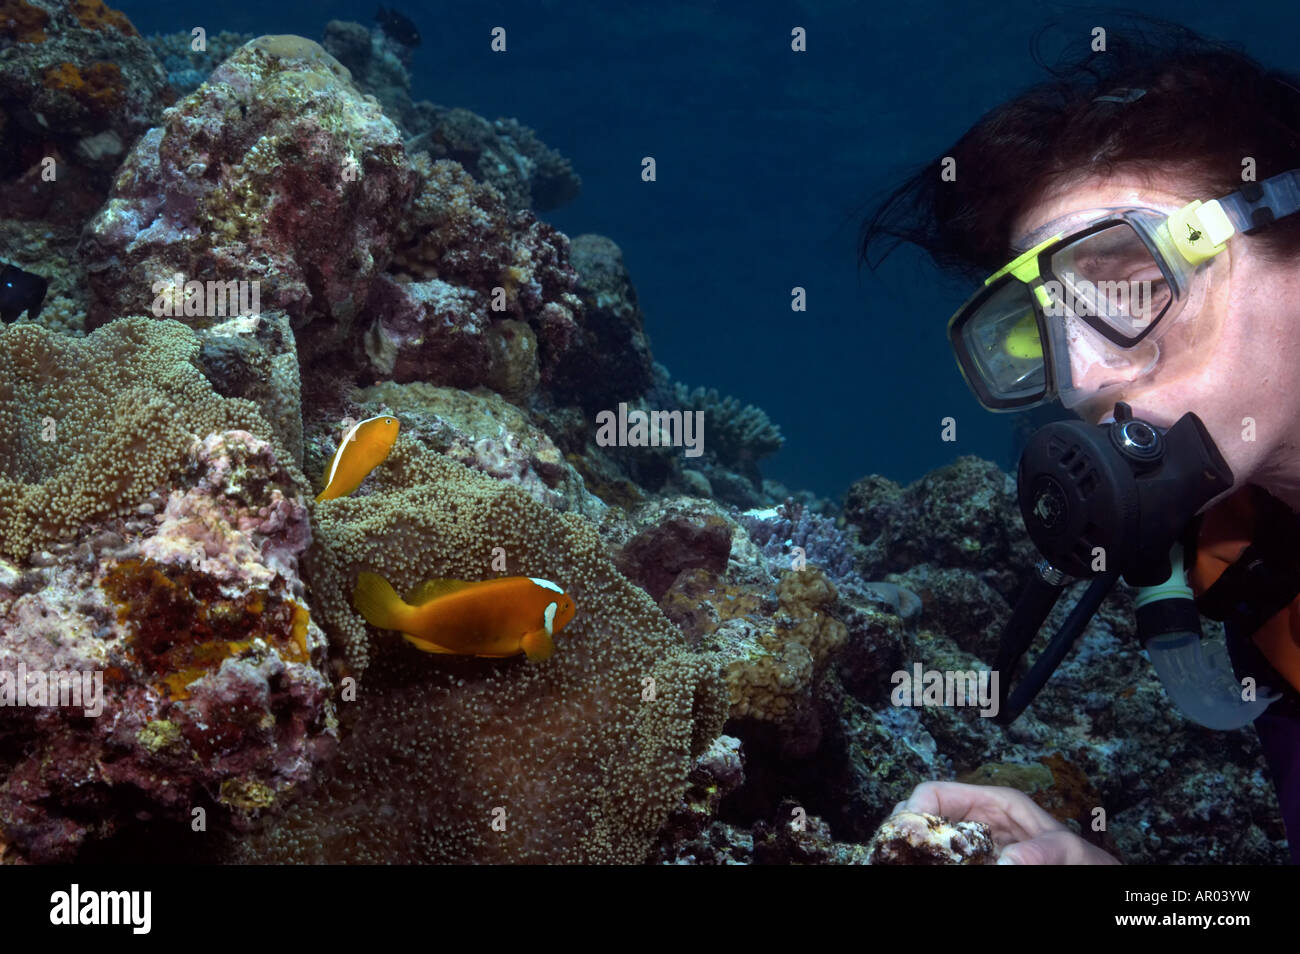 A White-Bonnet and an Orange Anemonefish answer the door to their Mertons Sea Anemone home as a scuba diver pays a call. Stock Photo